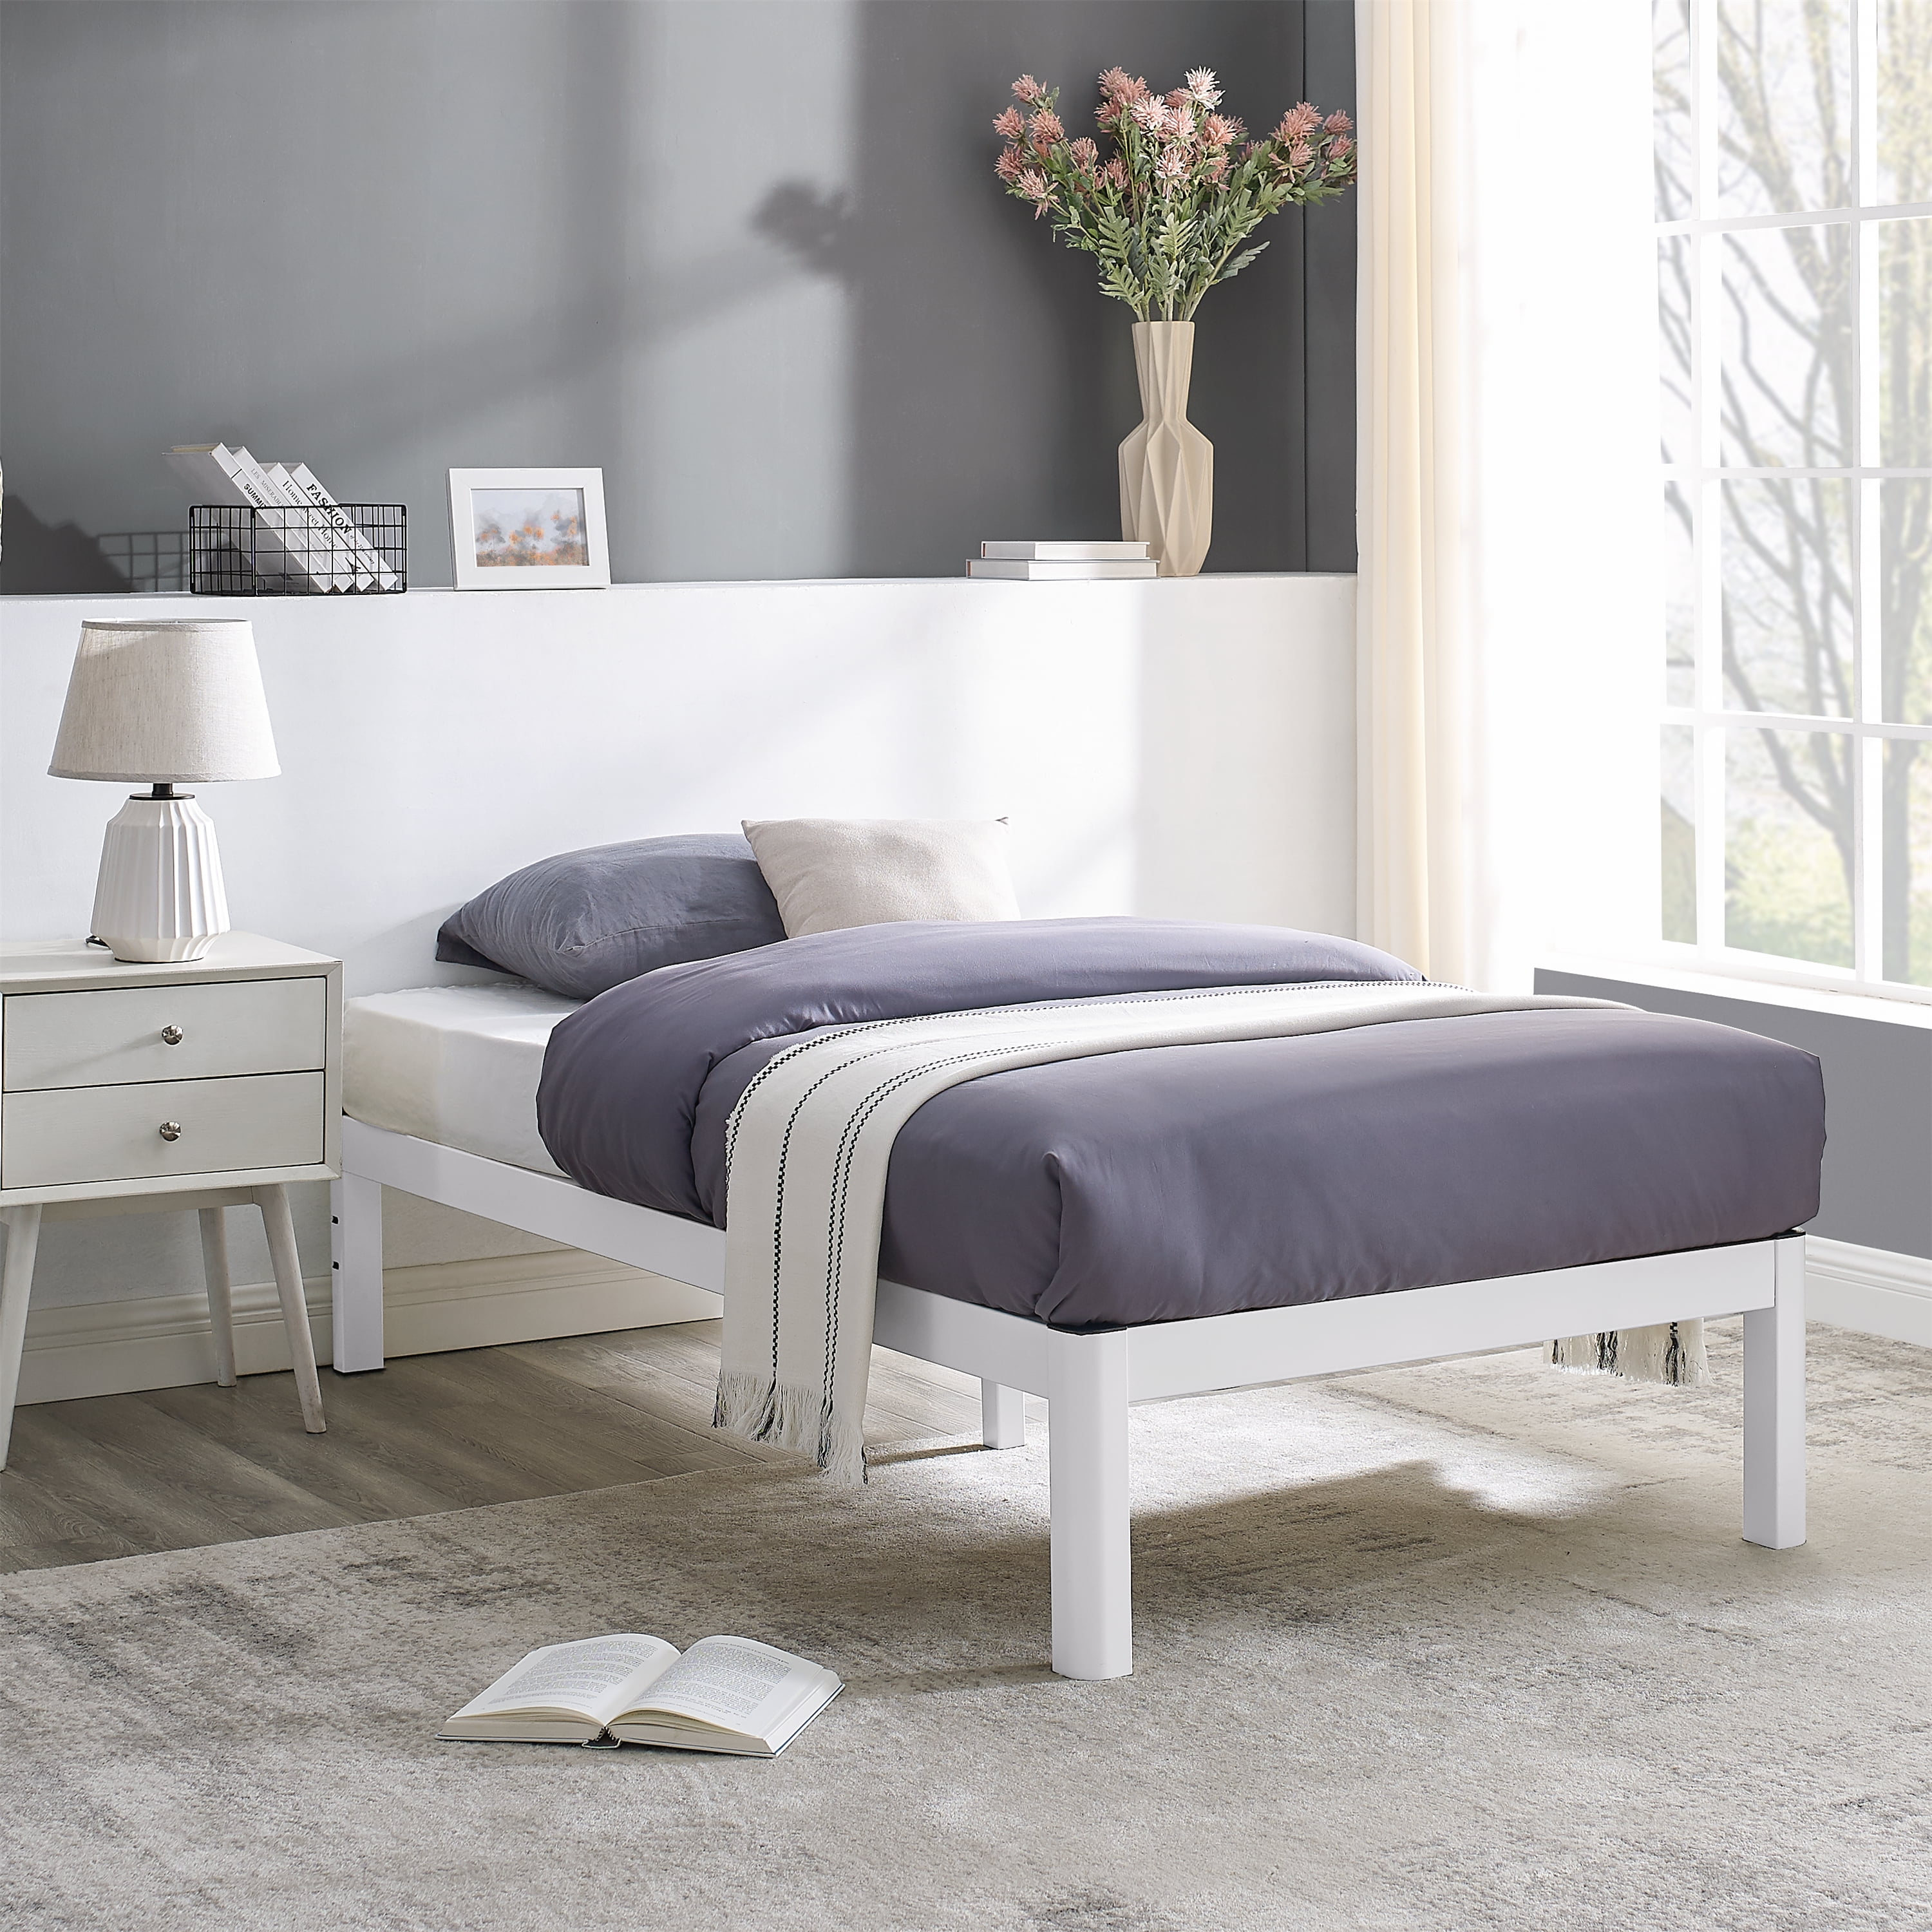 Mainstays Wood Slat White Metal Bed, Twin Metal Bed Frame With Wood Slats